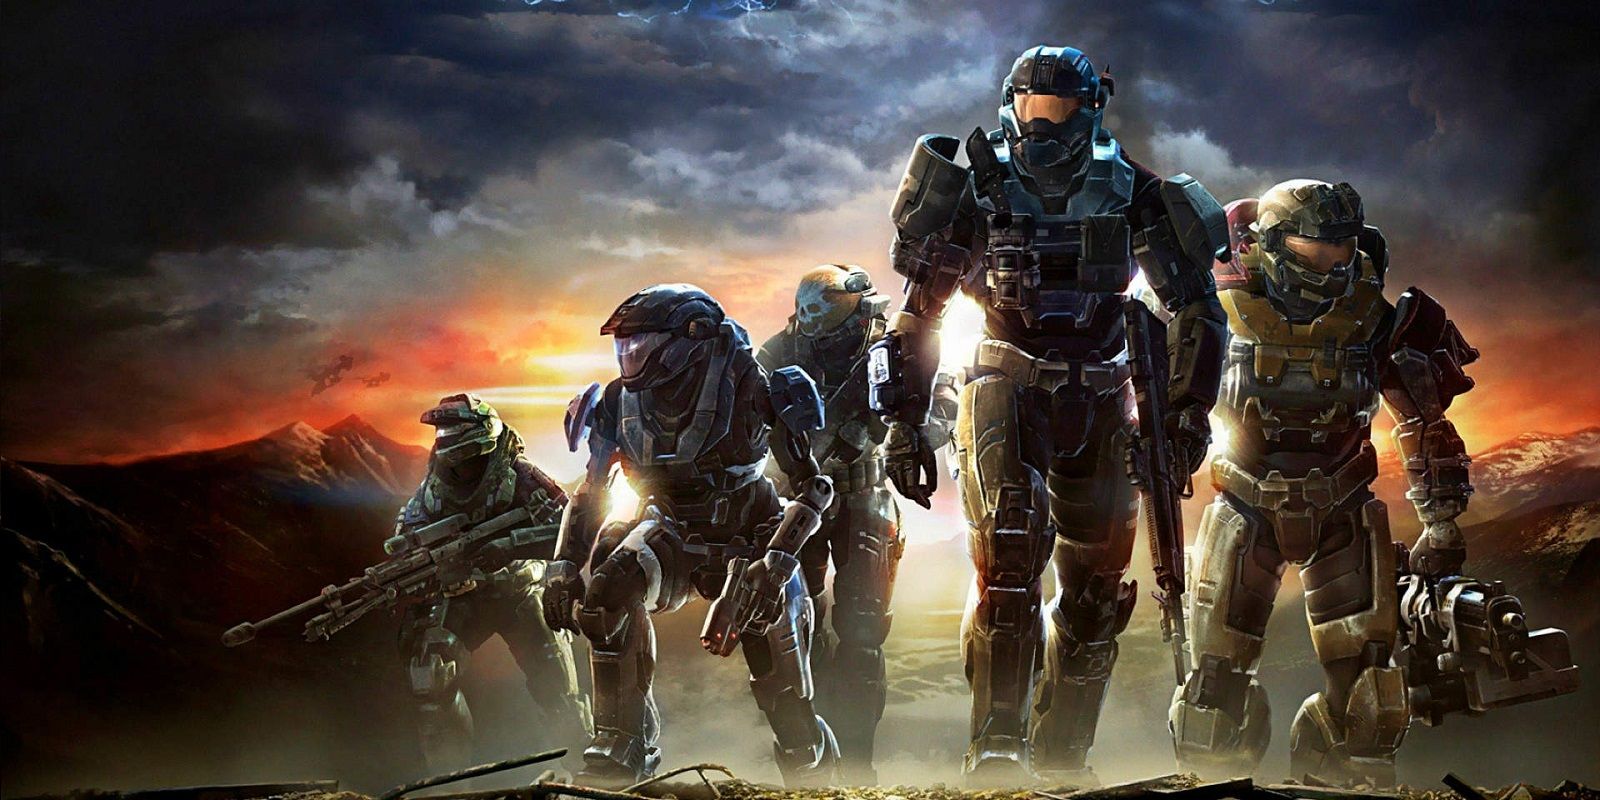 Noble Team standing in front of sunrise from Halo Reach